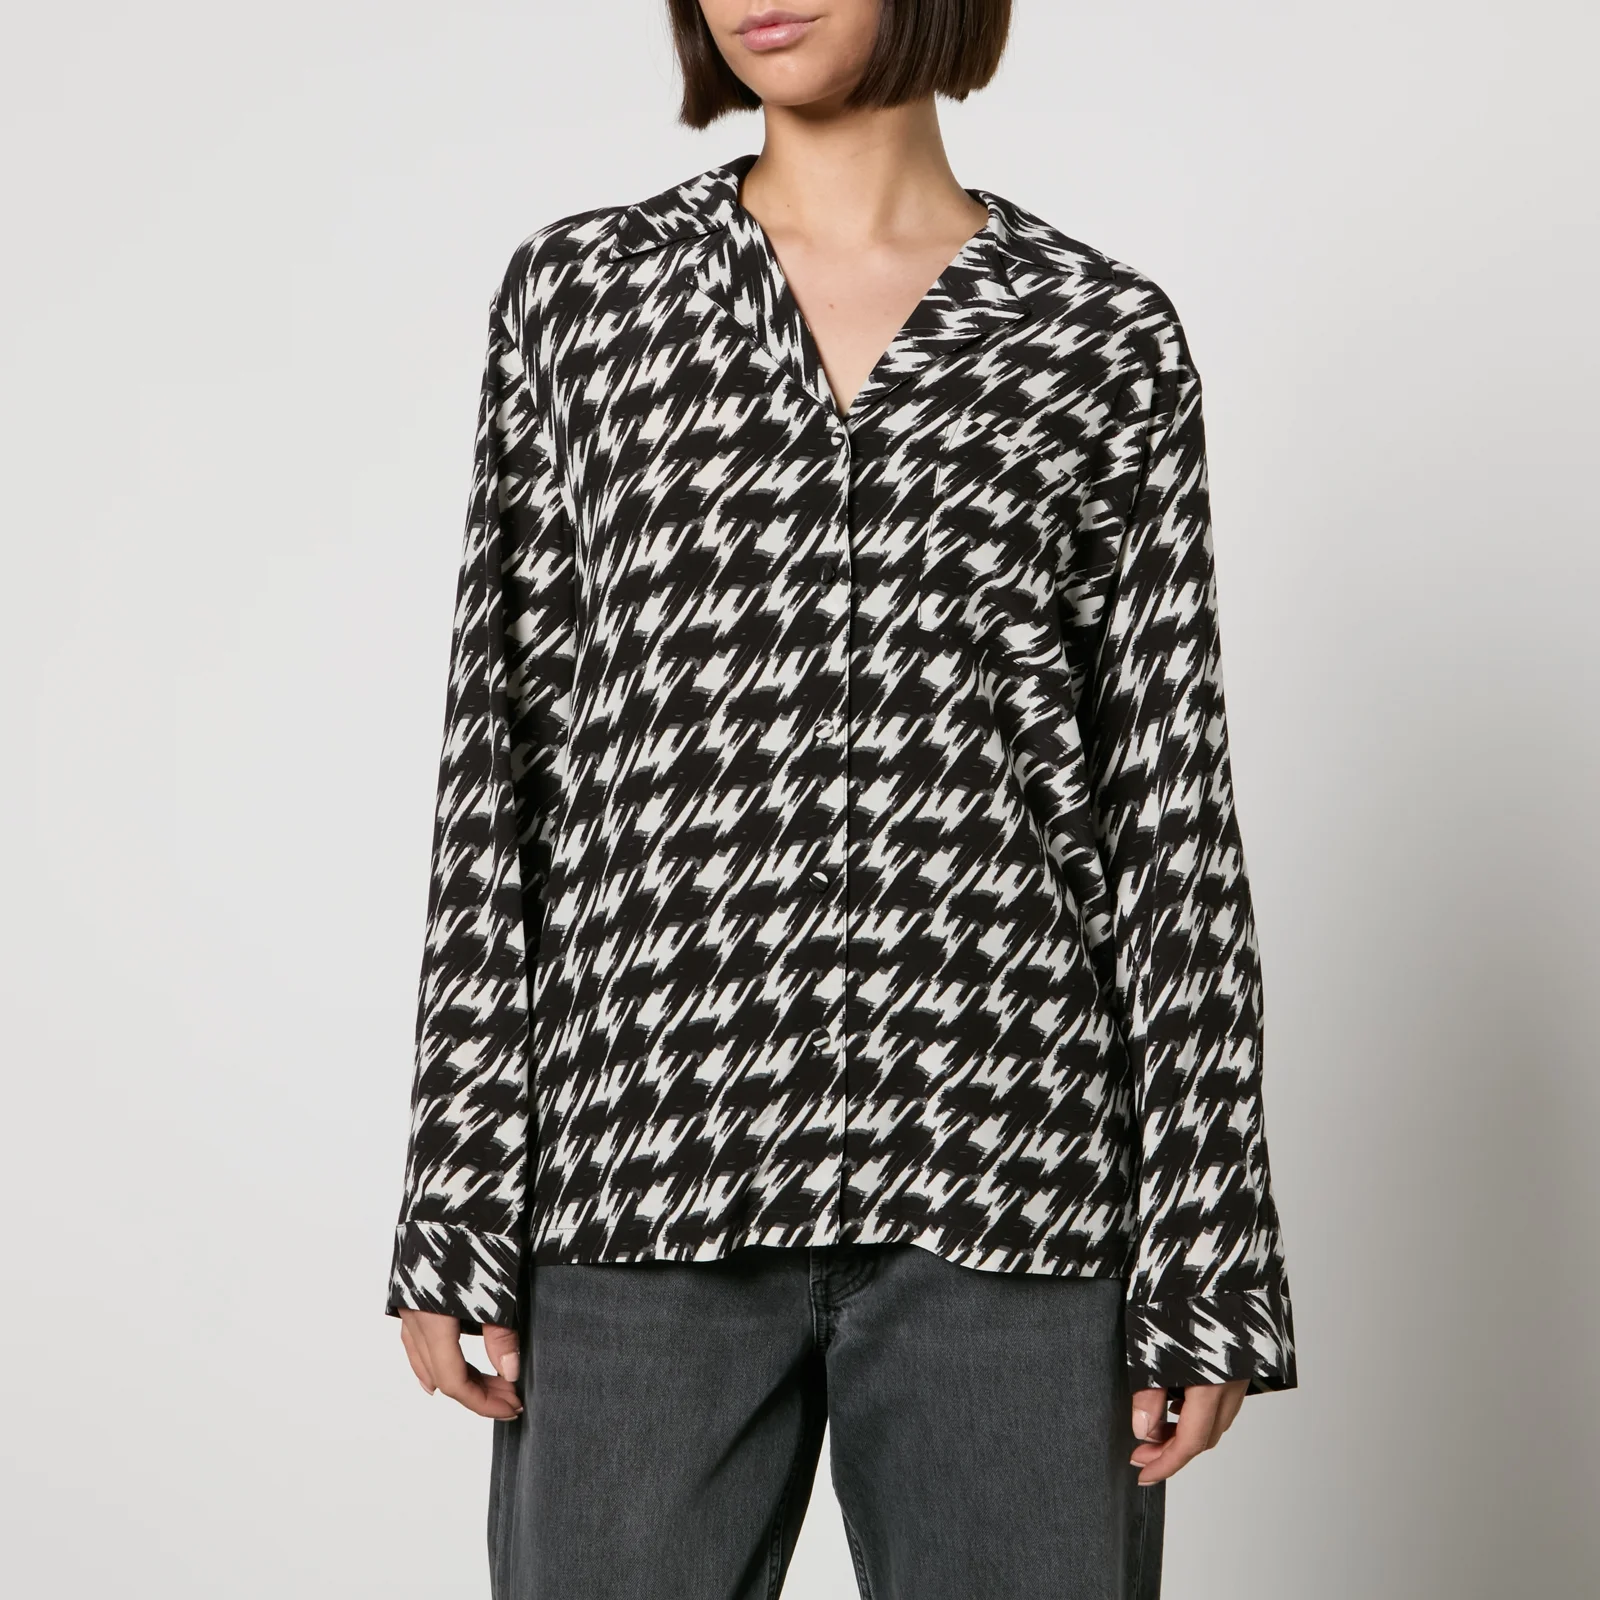 Anine Bing Aiden Houndstooth Crepe de Chine Shirt - XS Image 1